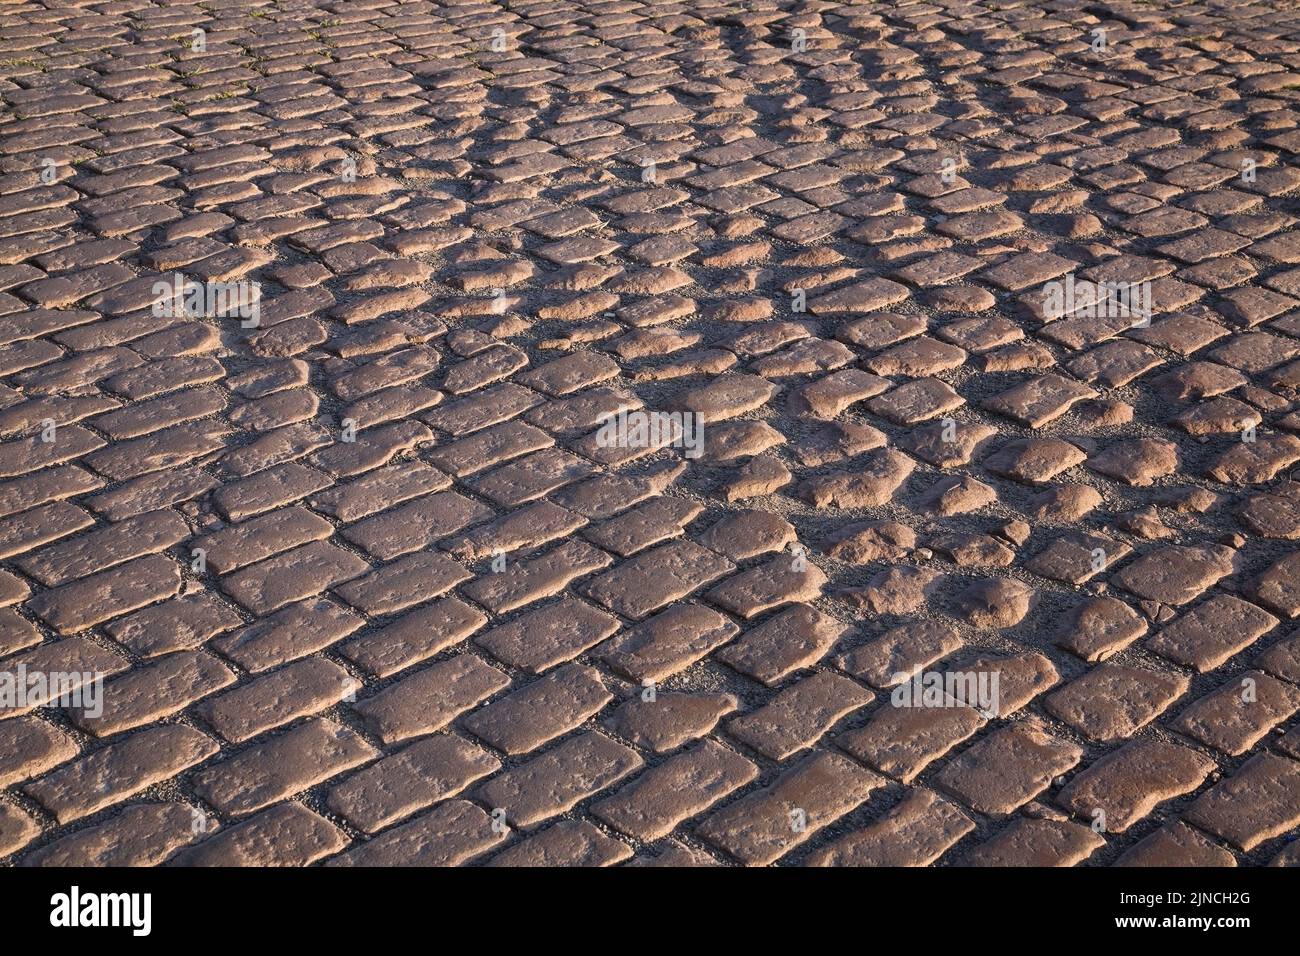 Close-up of brownish rectangular cobble style paving stones, Old Port of Montreal, Quebec, Canada Stock Photo